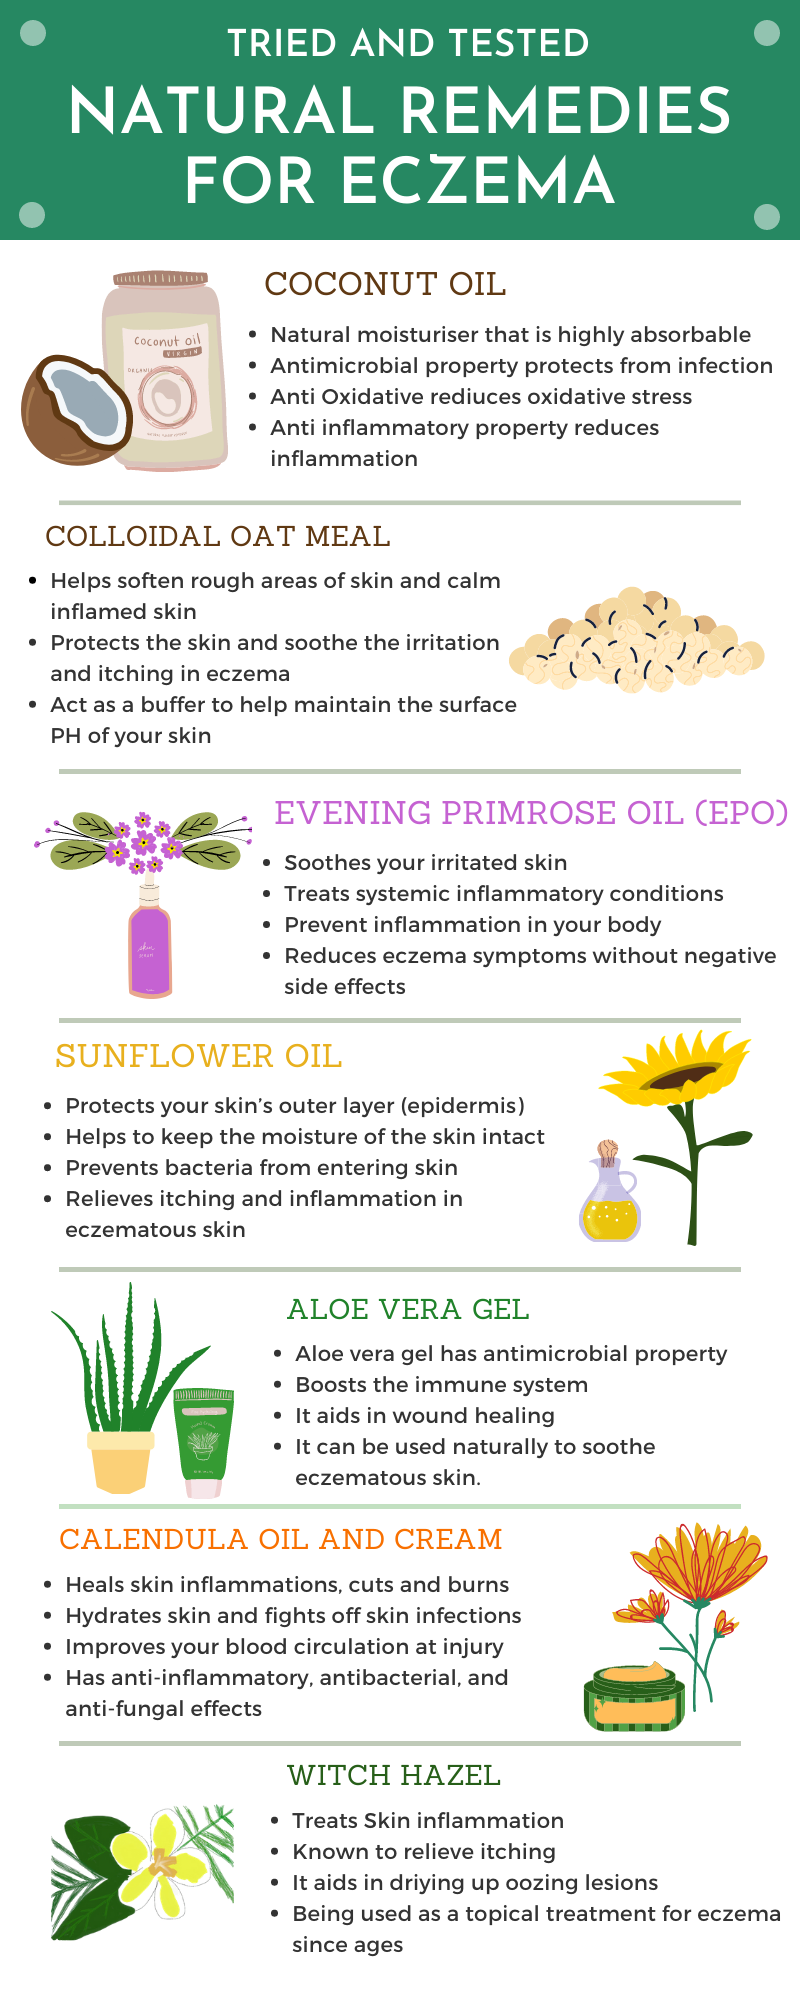 Natural remedies for eczema